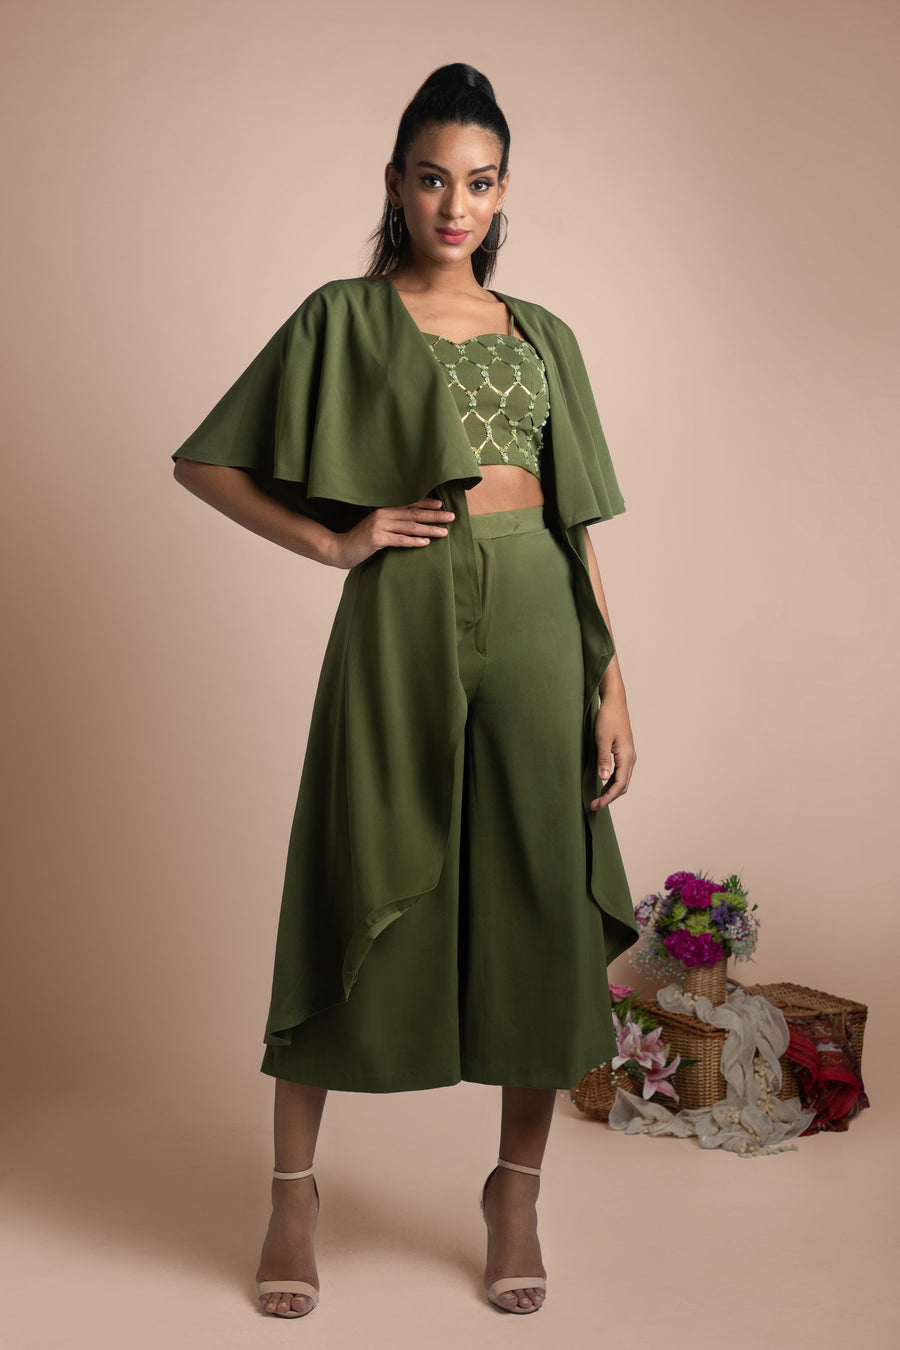 Mehak Murpana| Co-ord Set & Cape | Stylish formal and party wear.